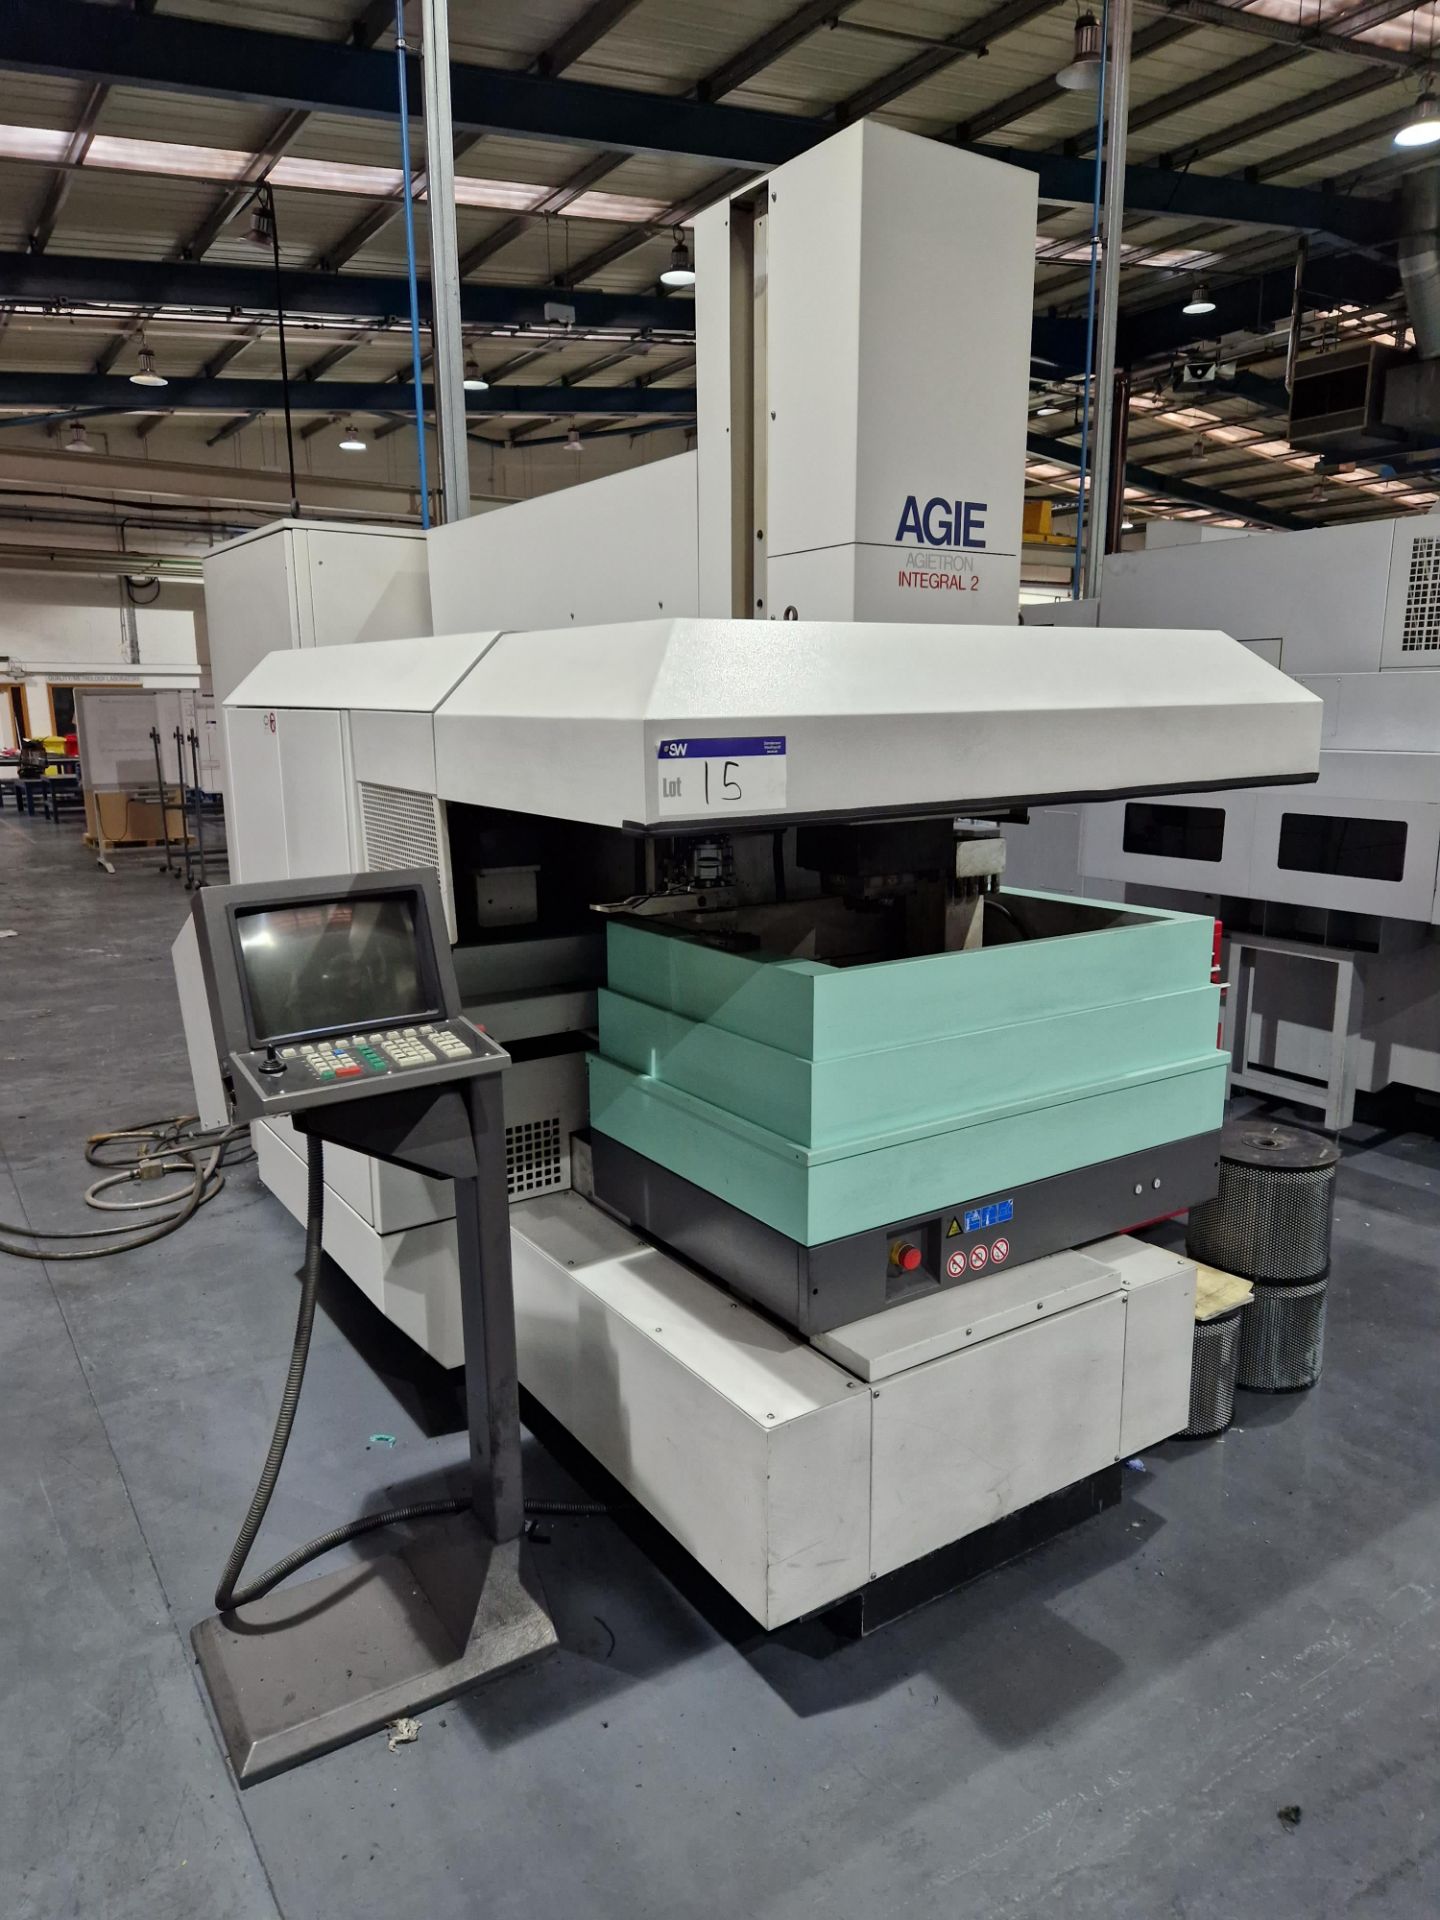 AGIE Agietron Integral 2 Vertical Eroding Machine, Serial No. 033.002, YoM 1997 with Aglematic T +